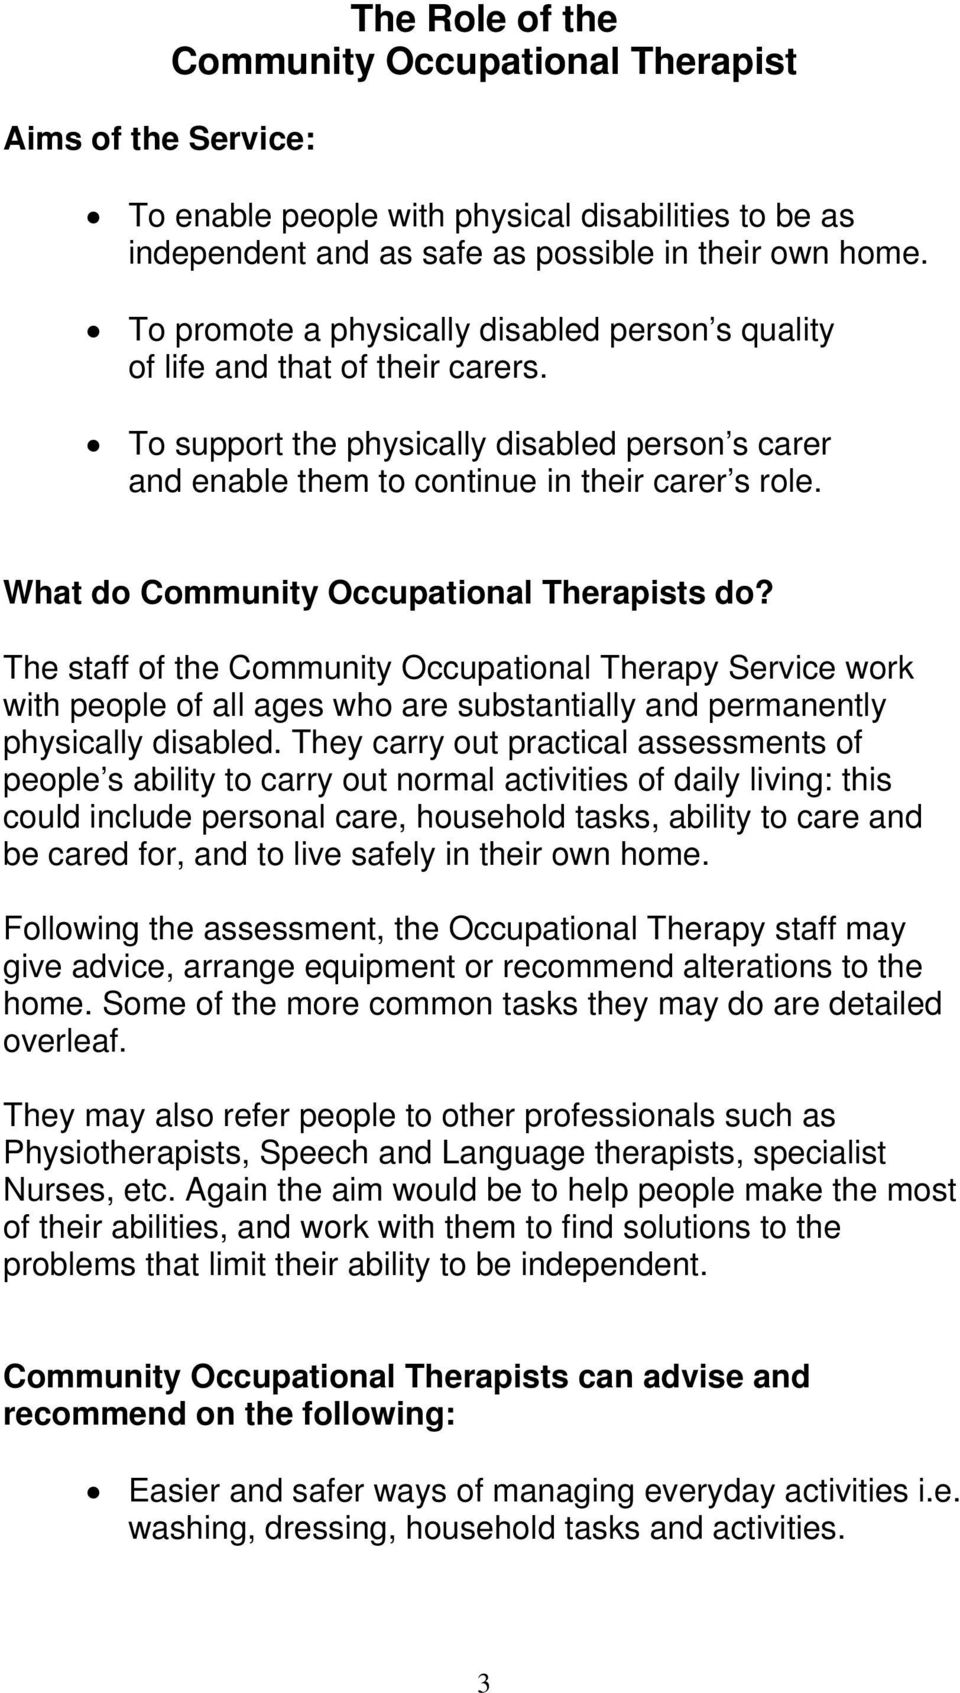 What do Community Occupational Therapists do? The staff of the Community Occupational Therapy Service work with people of all ages who are substantially and permanently physically disabled.